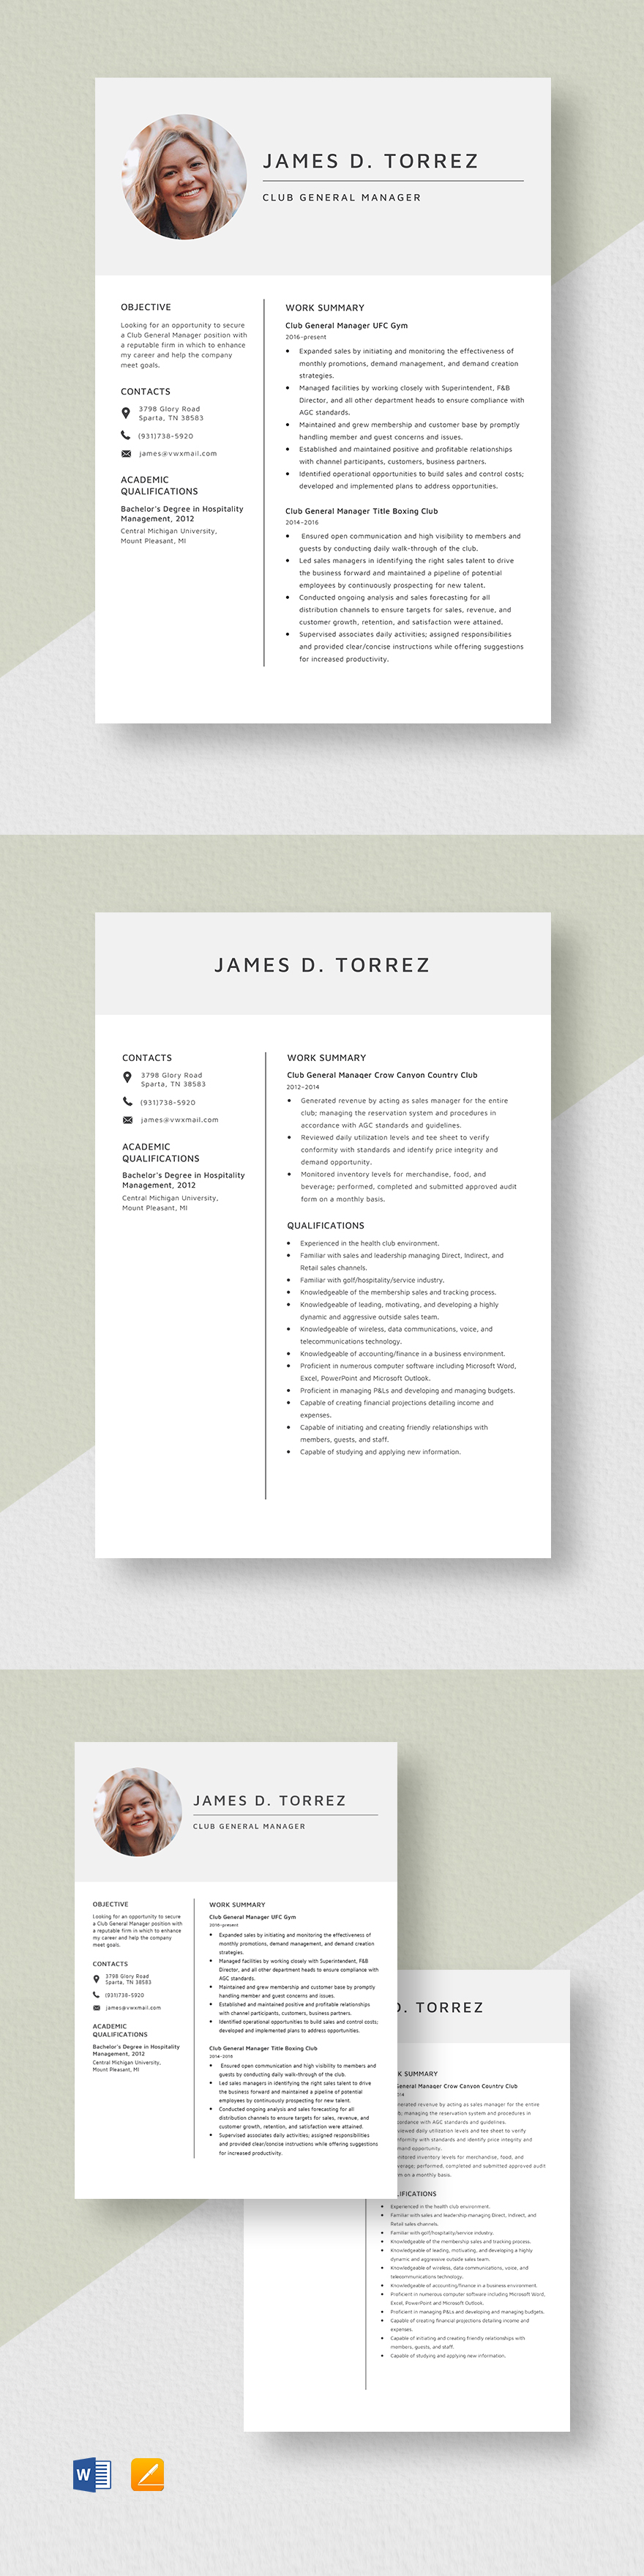 Club General Manager Resume Template